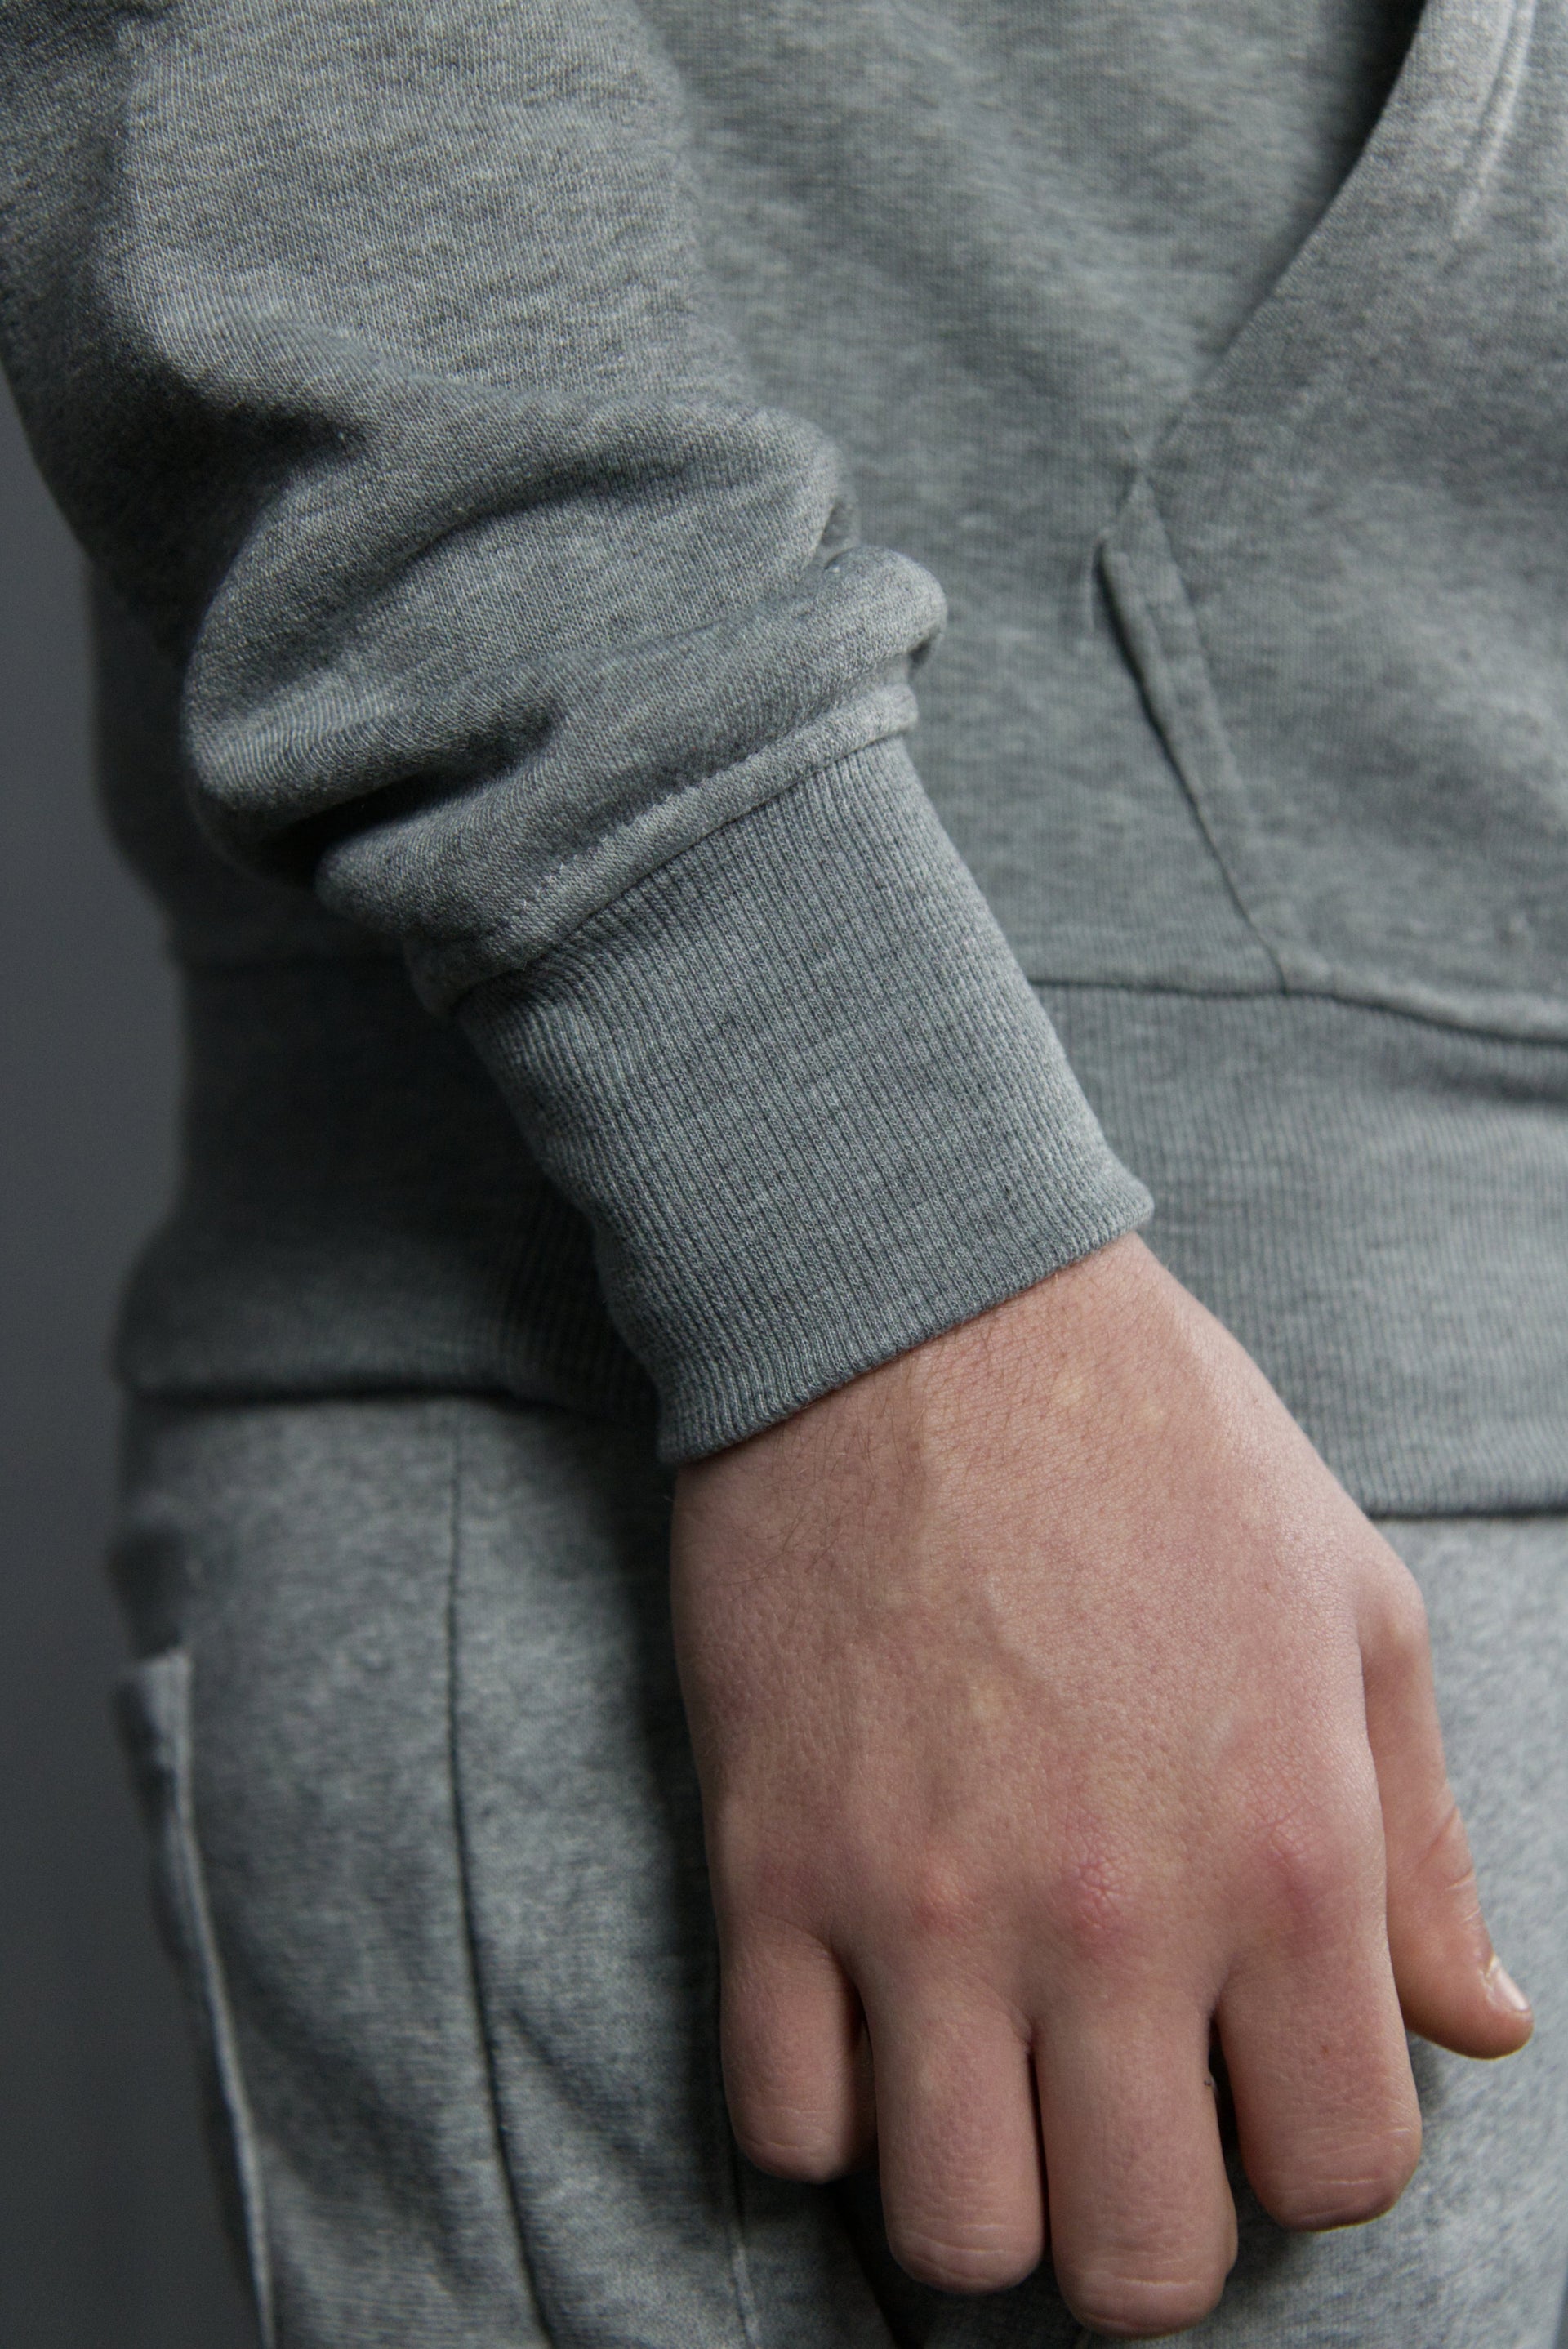 The sleeves of the classic fleece men's pullover hoodie are tapered and fit snug around the wearer's wrist for maximum maneuverability and comfort